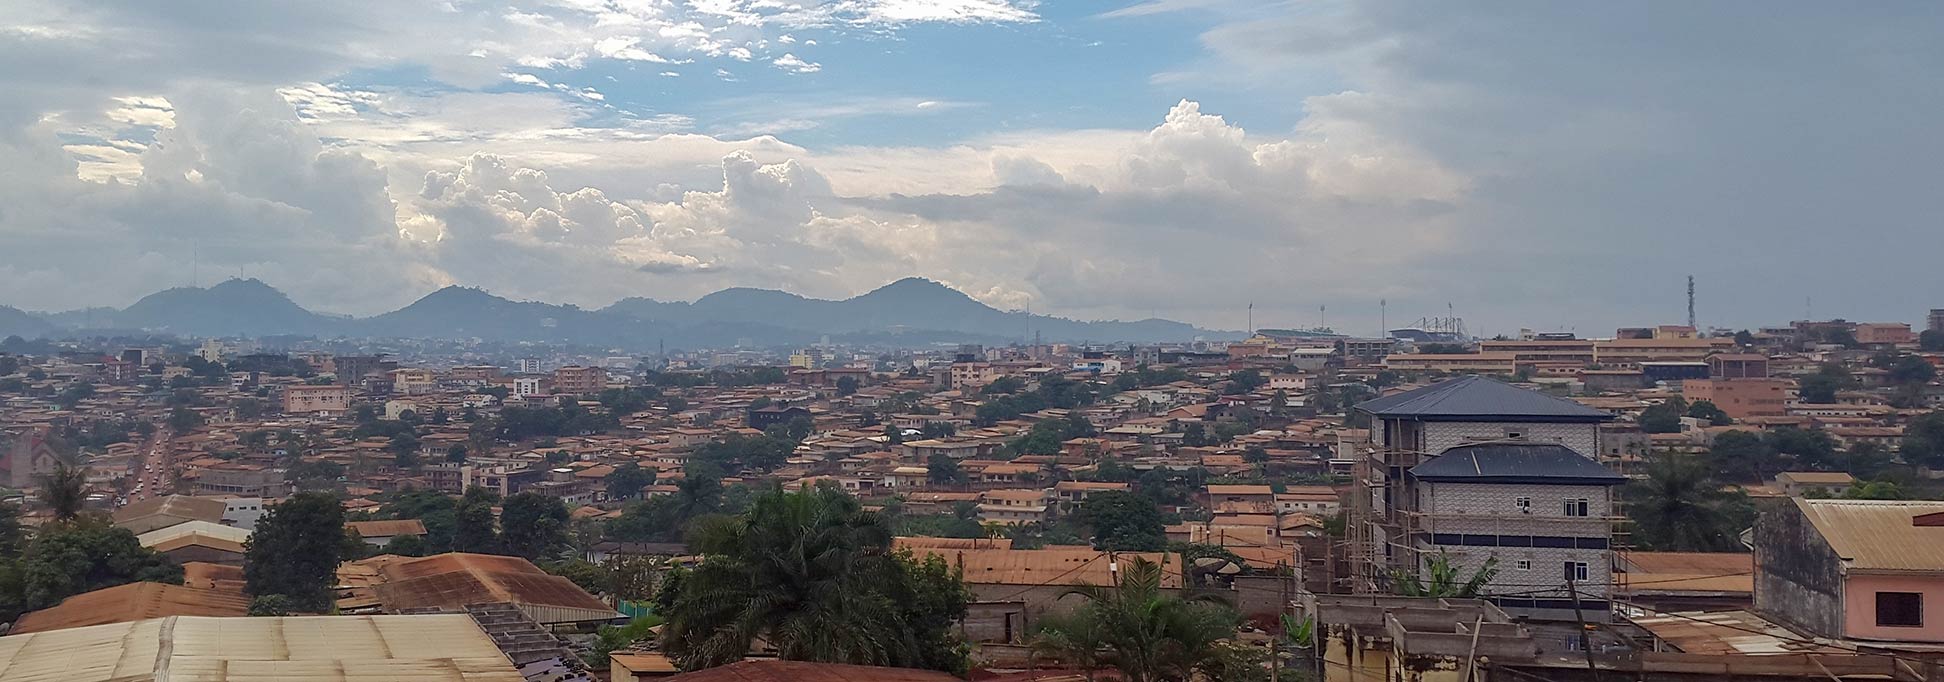 View of Mimboman district in Yaoundé, capital city of Cameroon